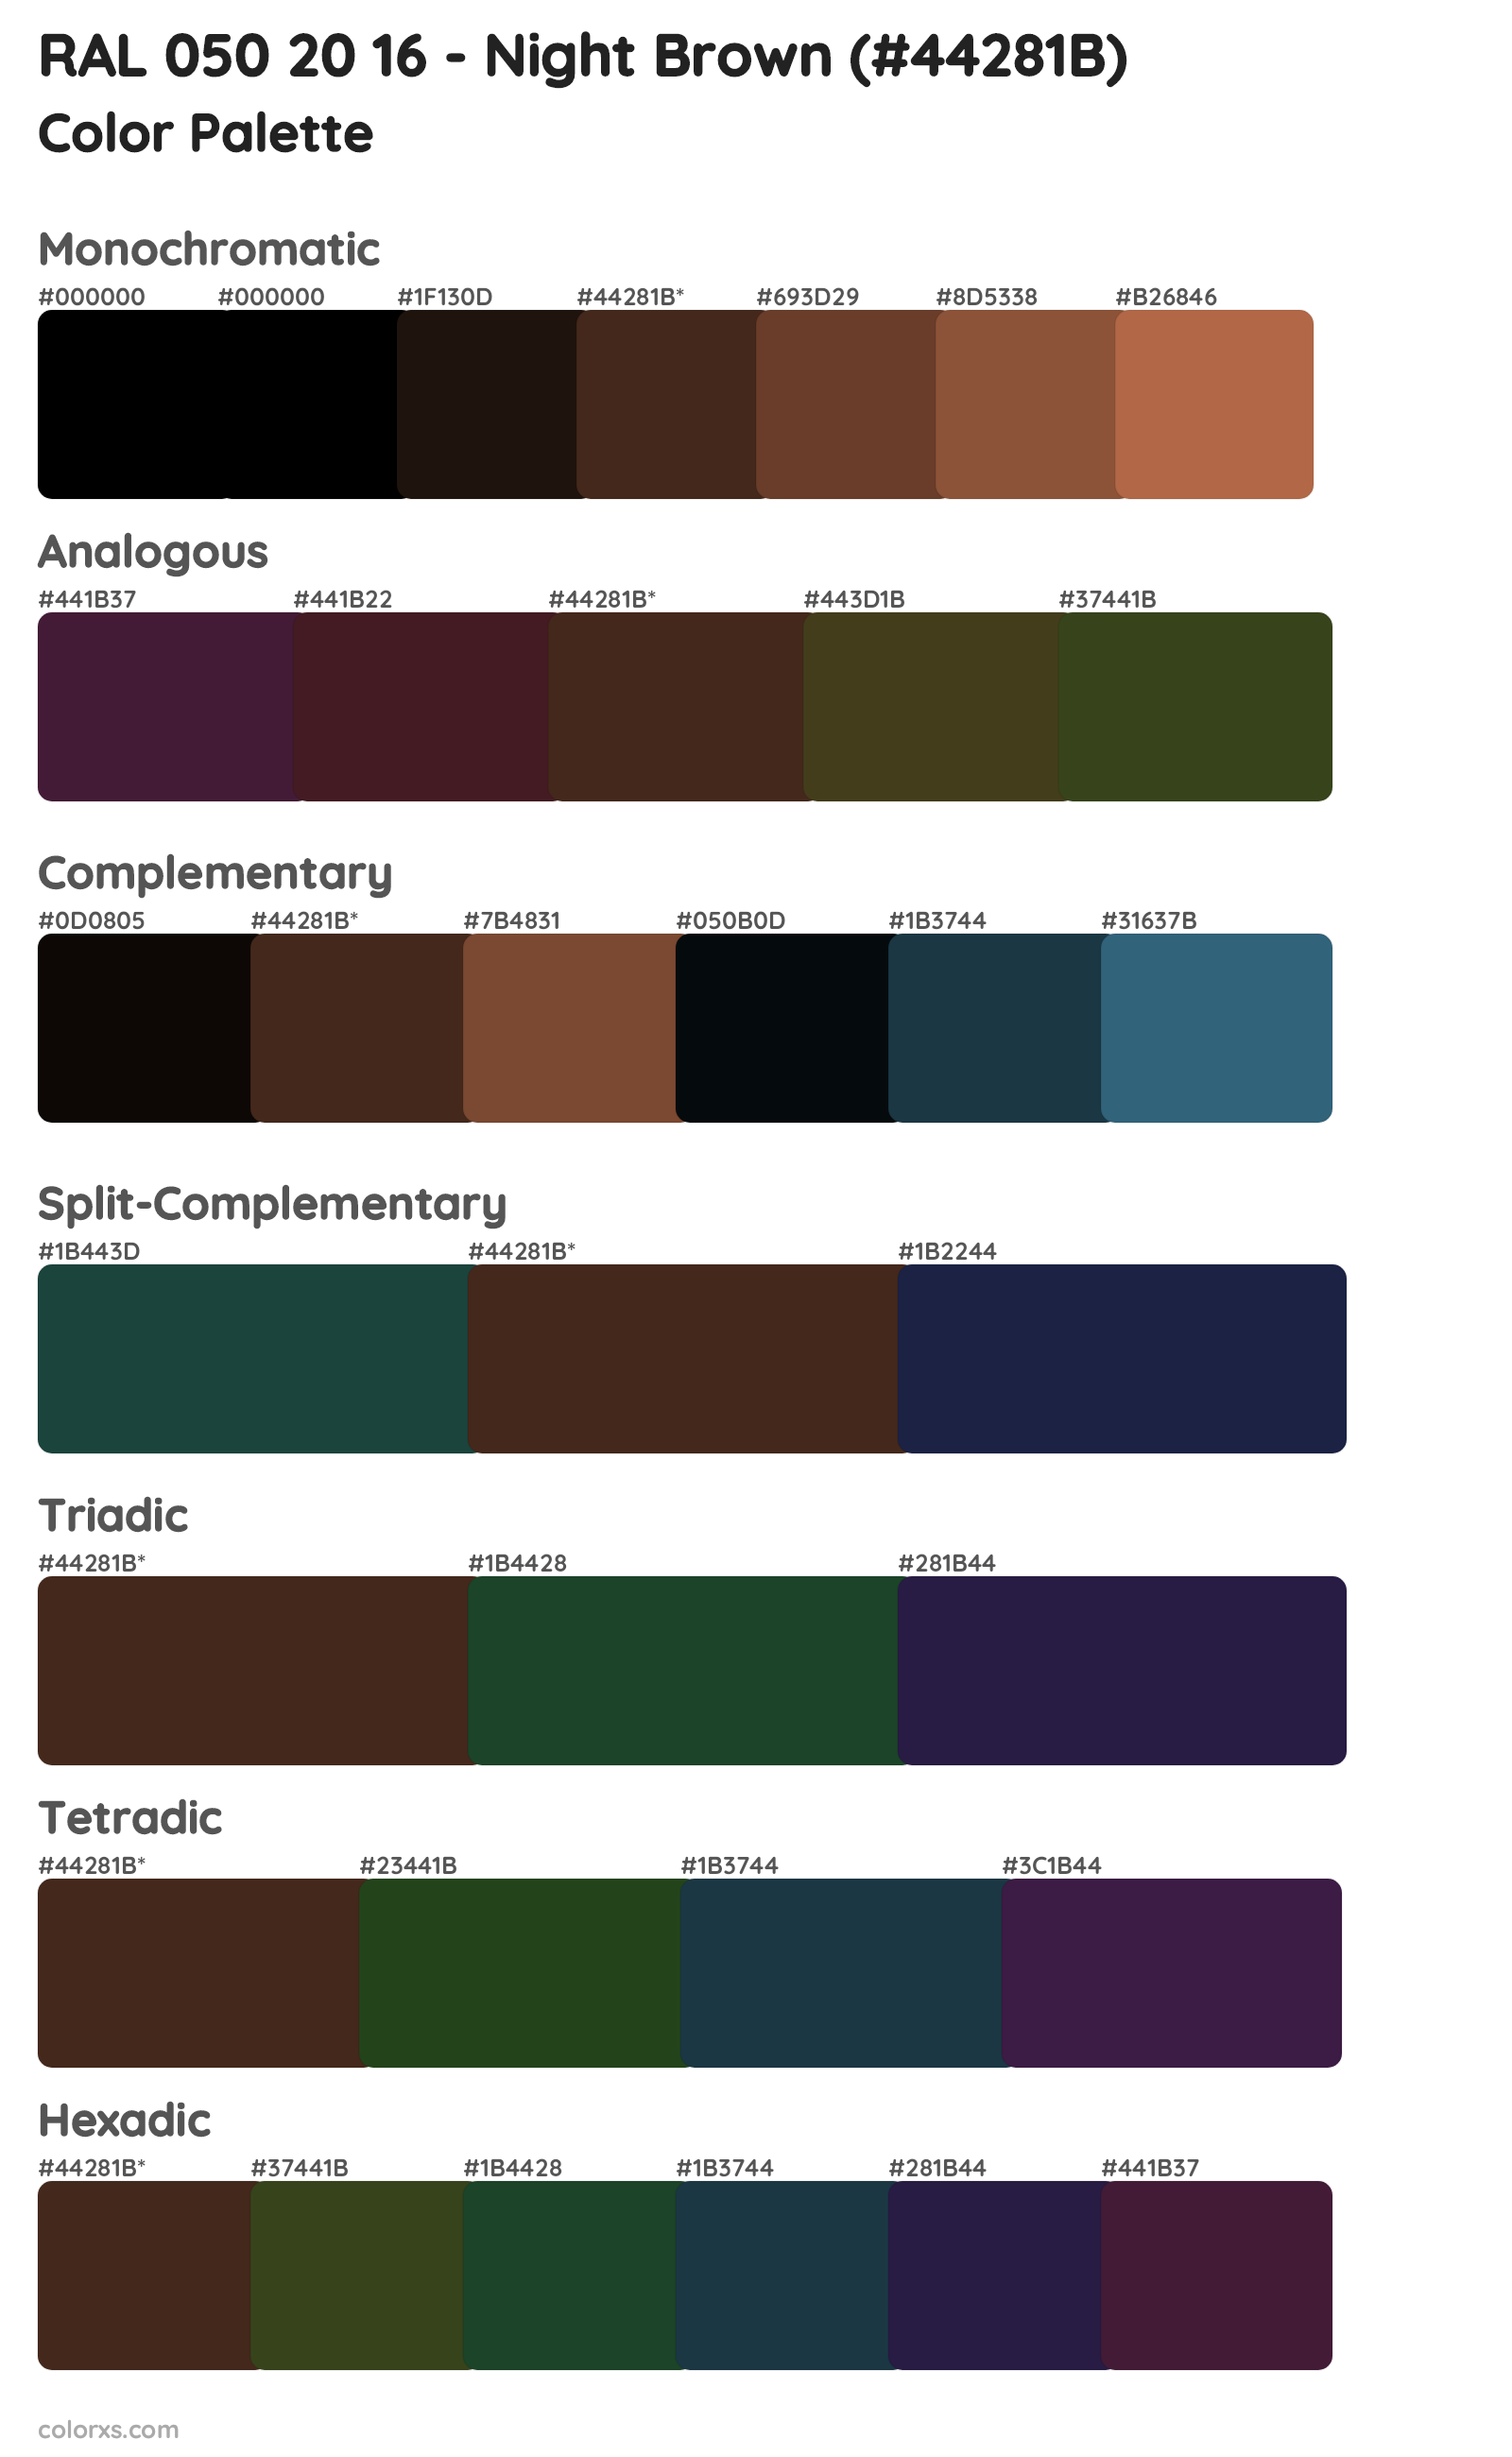 RAL 050 20 16 - Night Brown Color Scheme Palettes